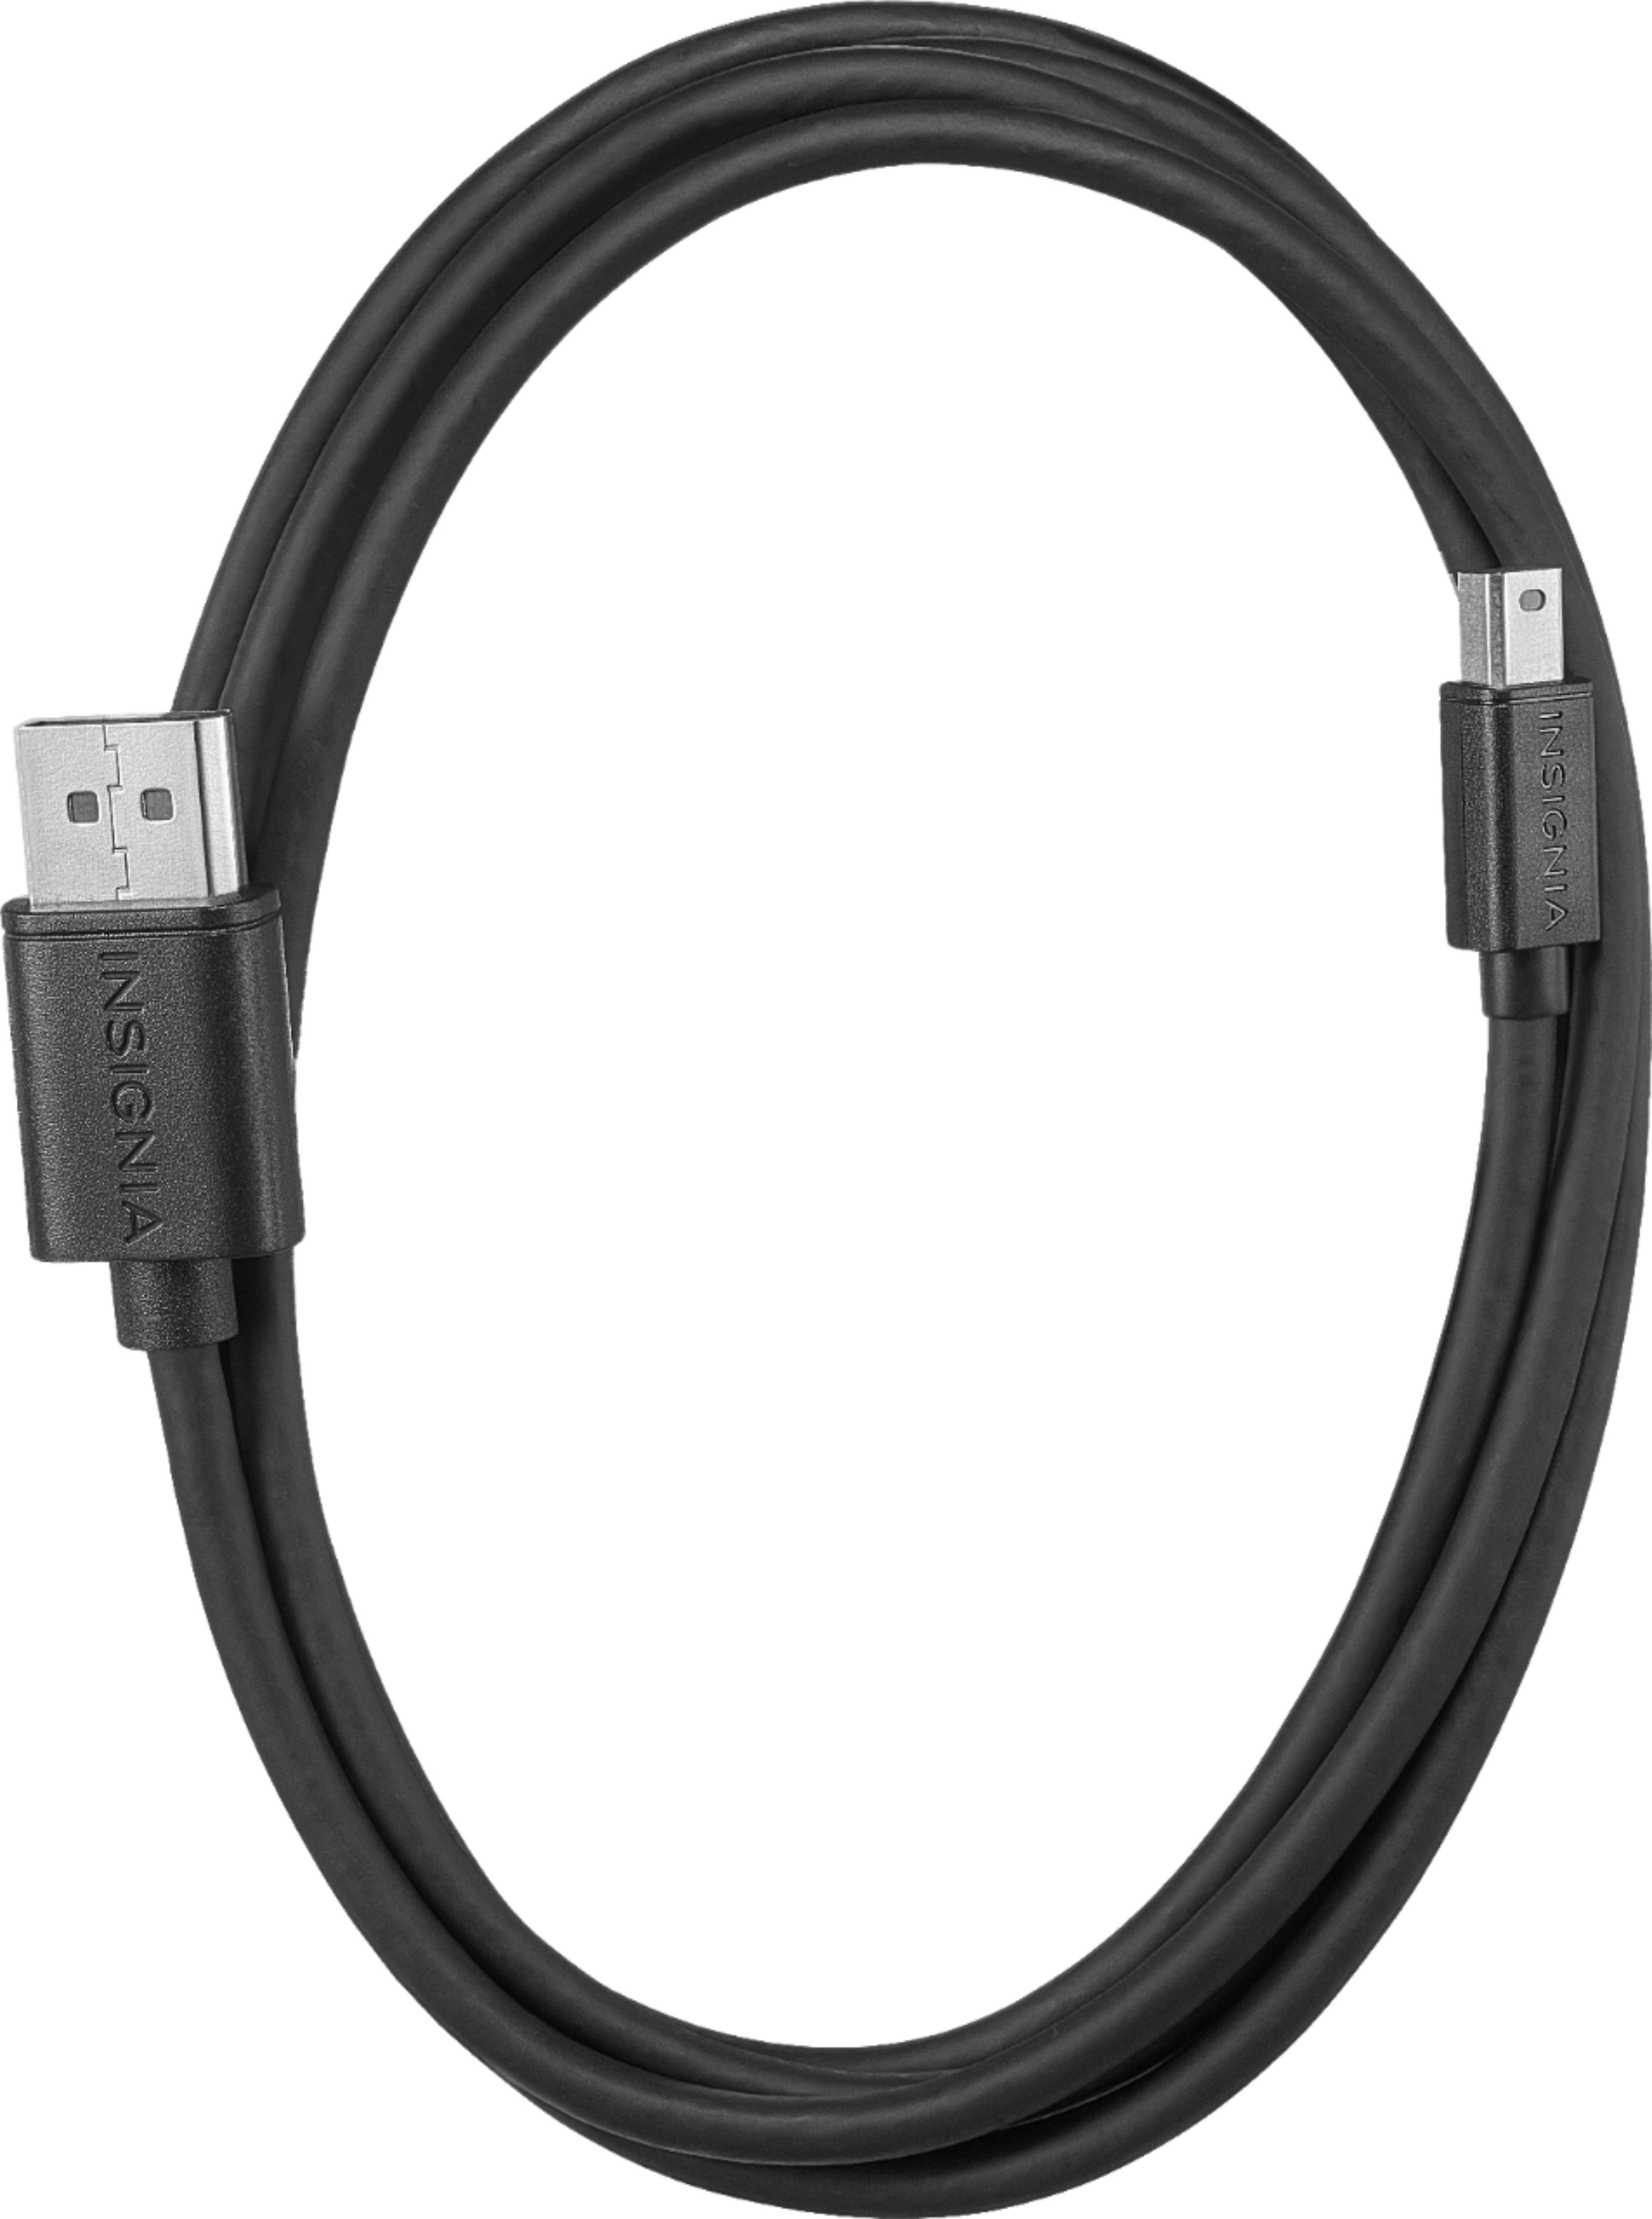 Insignia™ 6' USB-C to DisplayPort Cable White NS-PCKCD6 - Best Buy